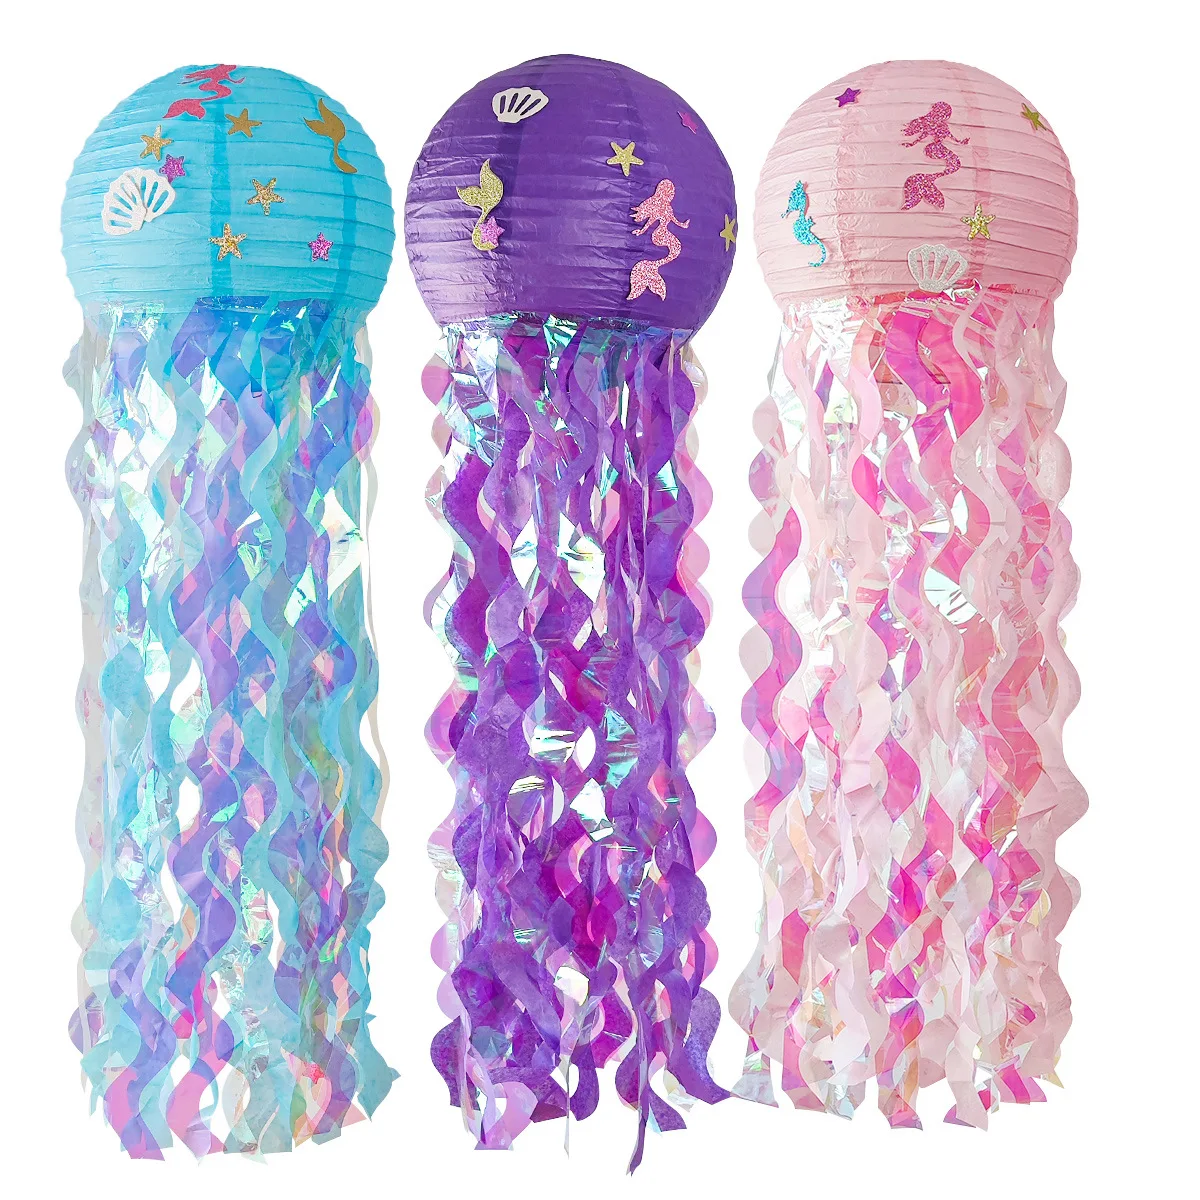 Mermaid Party Decoration Diy Hanging Jellyfish Lantern Little Mermaid Under The Sea Party Birthday Party Decorations Baby Shower